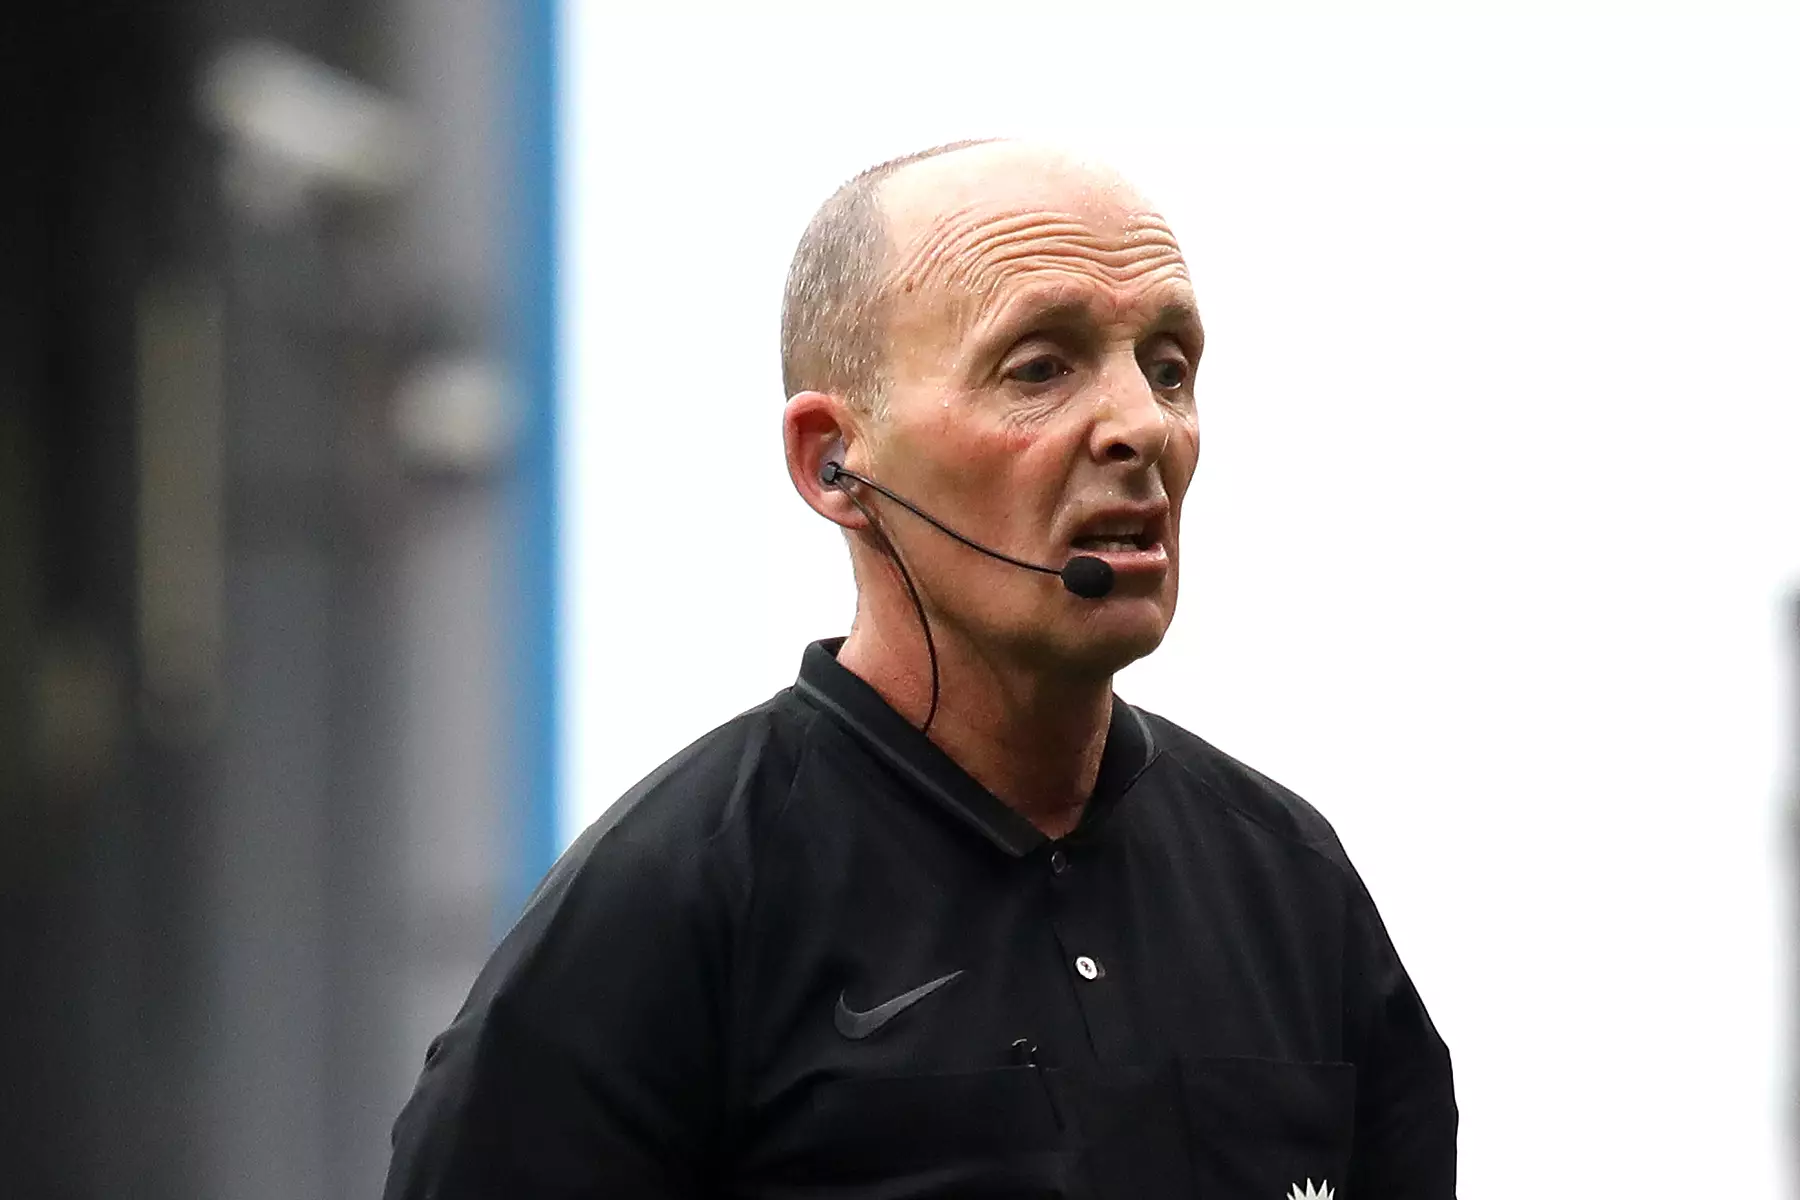 The return of the Premier League means the return of Mike Dean. Image: PA Images